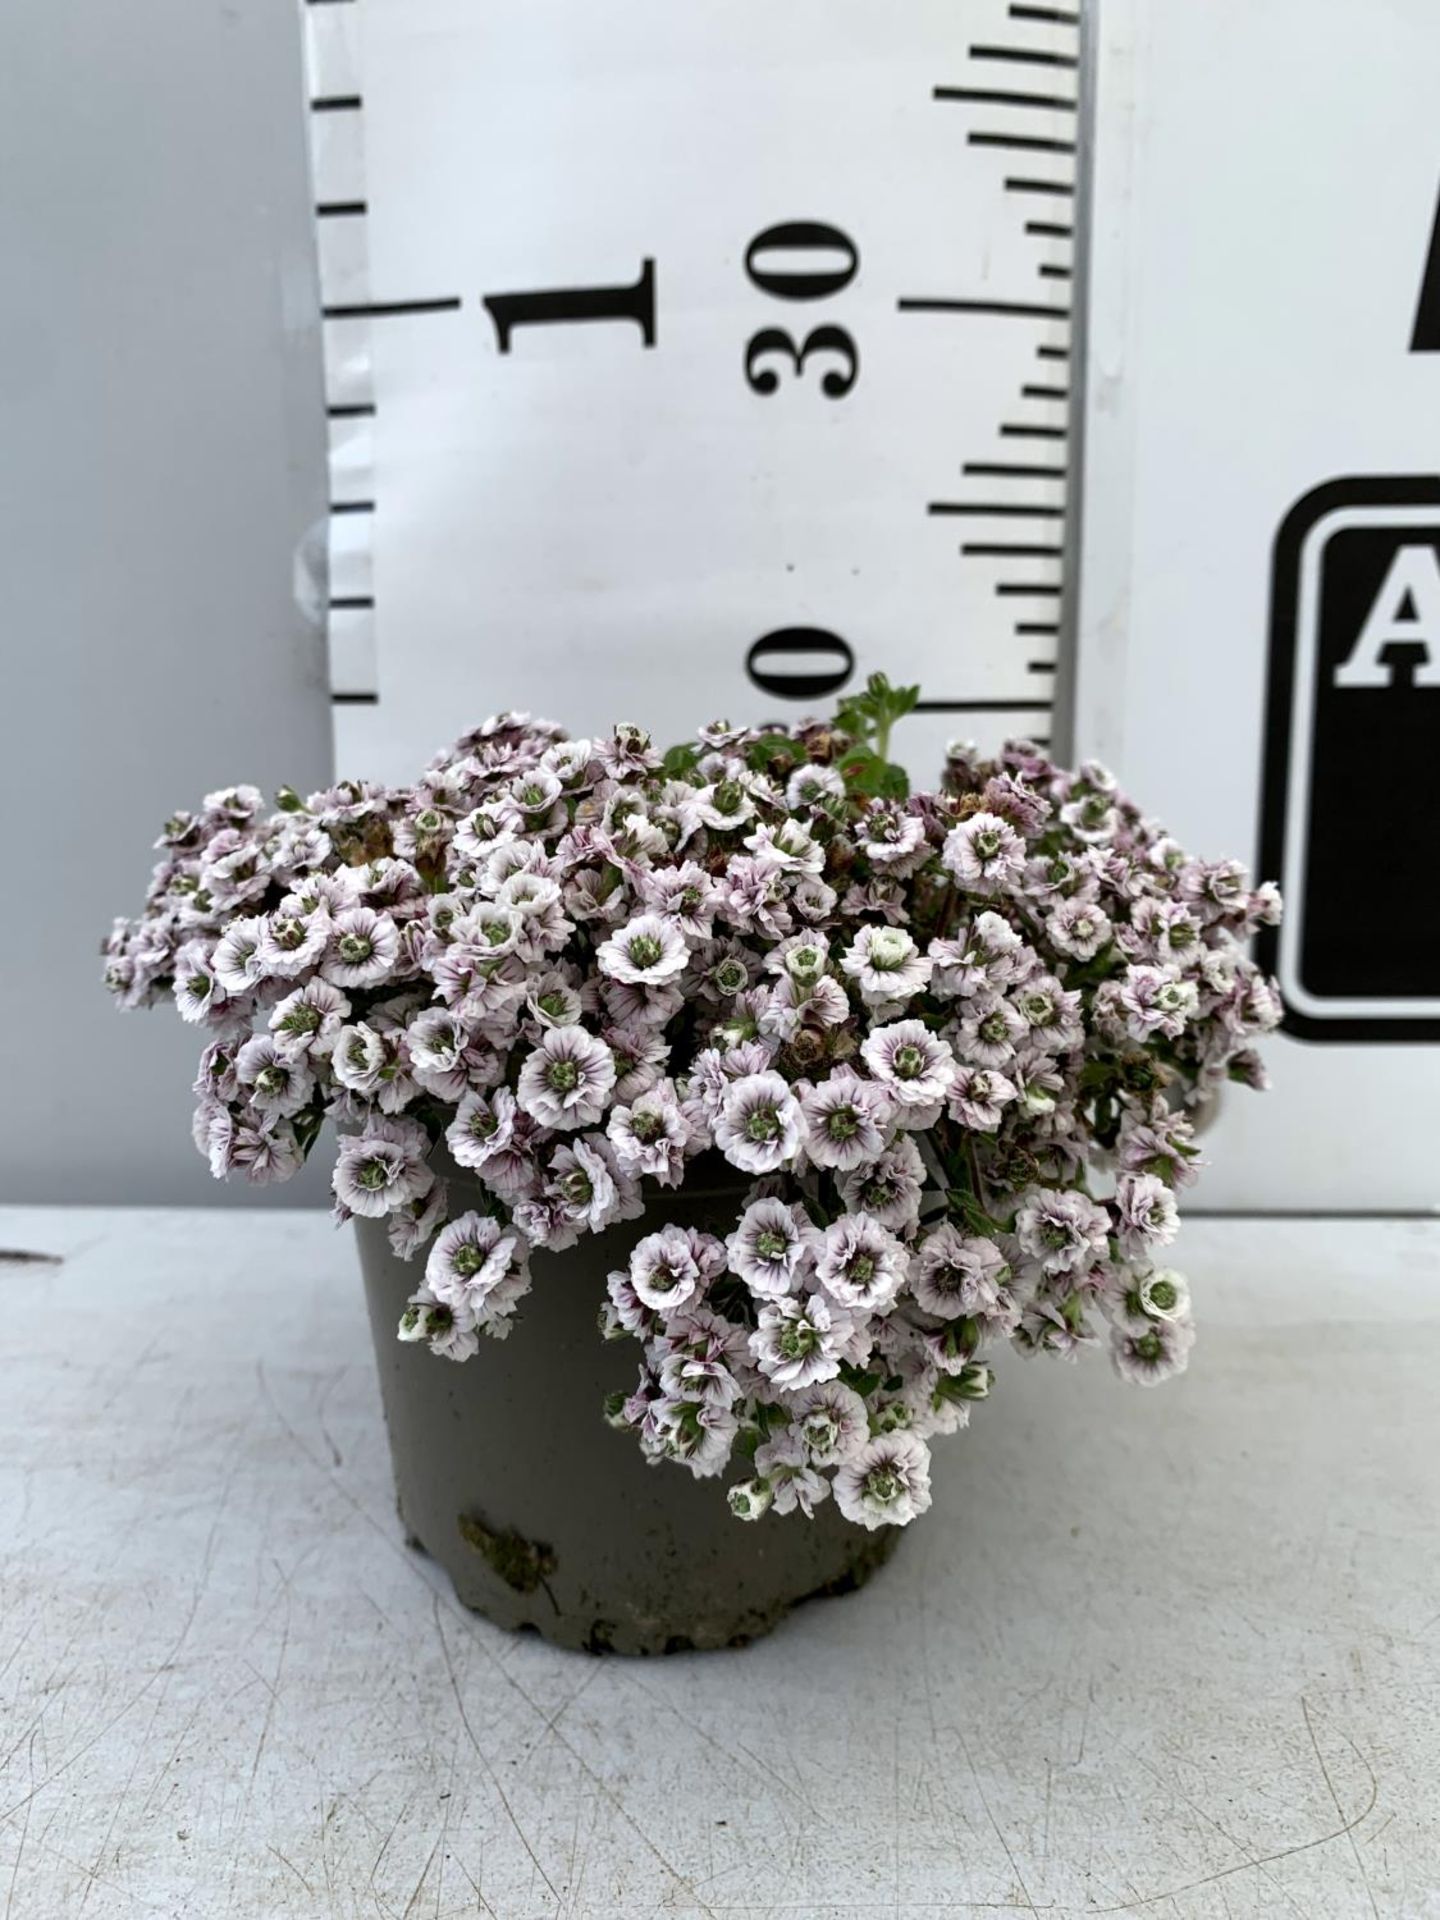 EIGHT GYPSOPHILA CERASTIOIDES PLENA WHITE IN 1 LTR POTS APPROX 20CM IN HEIGHT PLUS VAT TO BE SOLD - Image 7 of 8